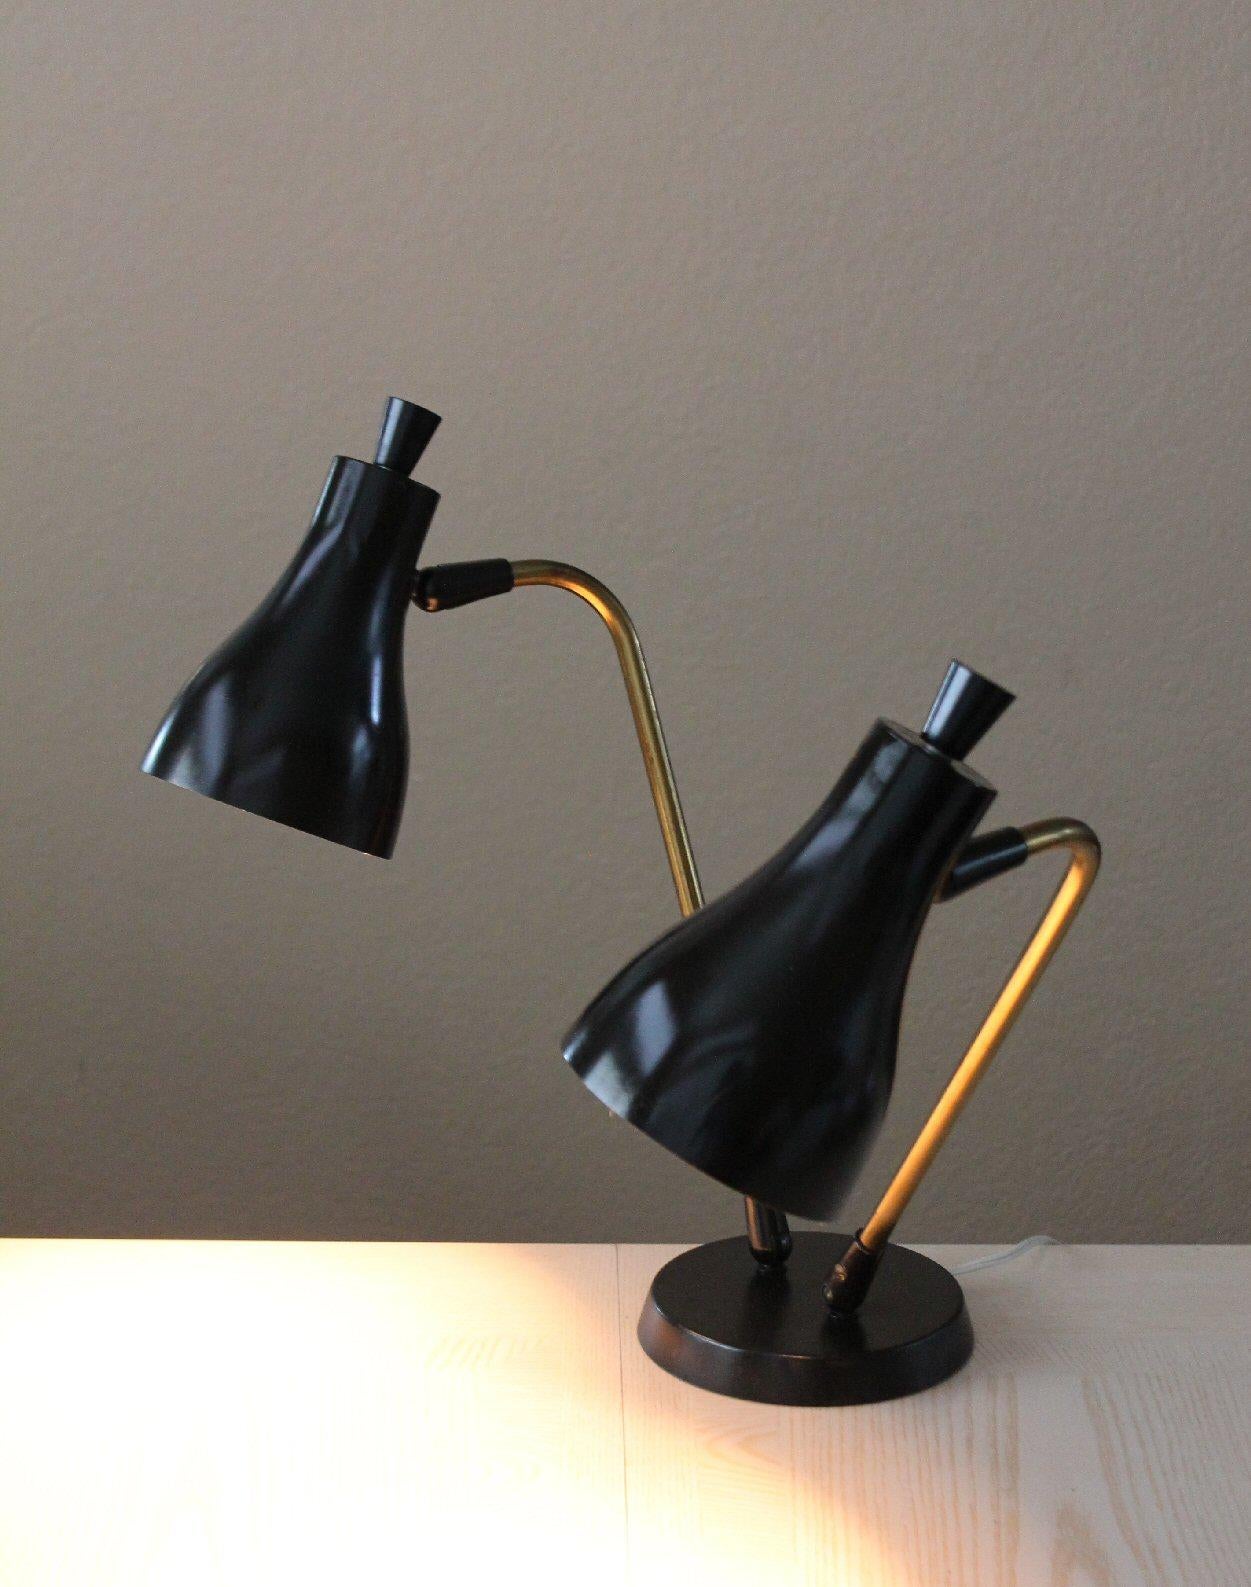 Mid Century Modern Lightolier Lamp Gerald Thurston  1952 Case Study Home In Good Condition For Sale In Peoria, AZ